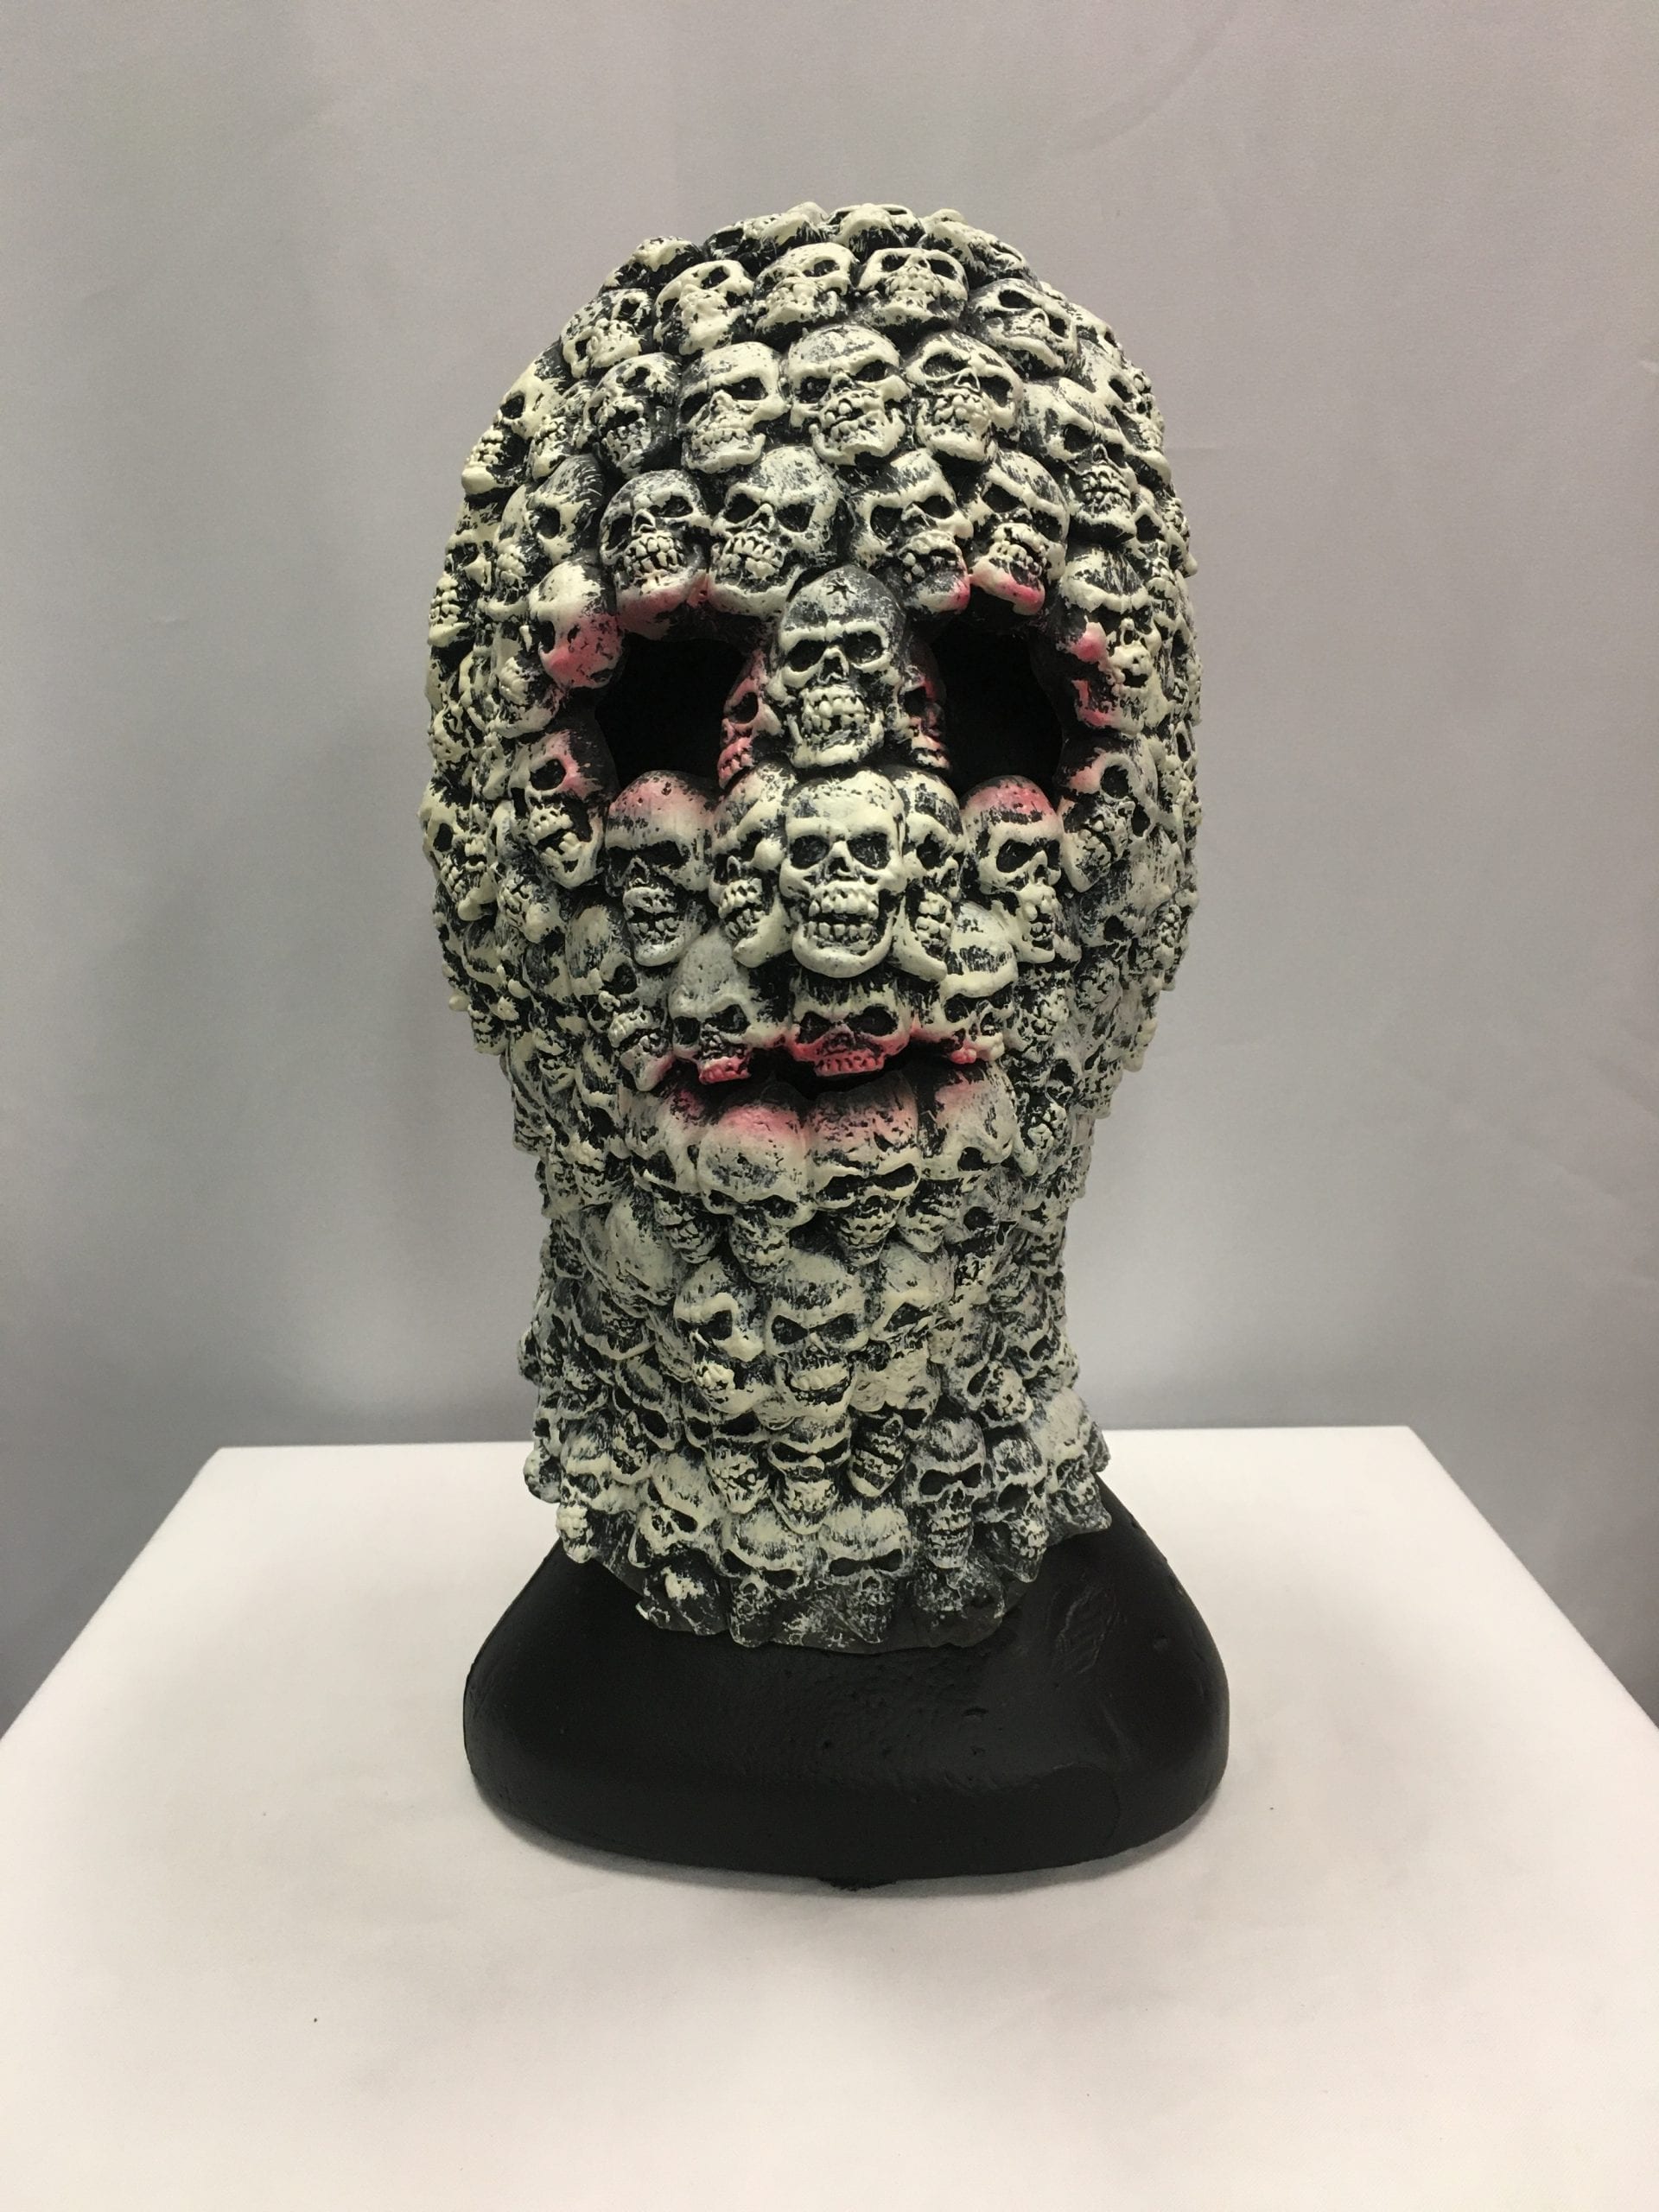 Featured image for “Face of Skulls Mask, Adult”